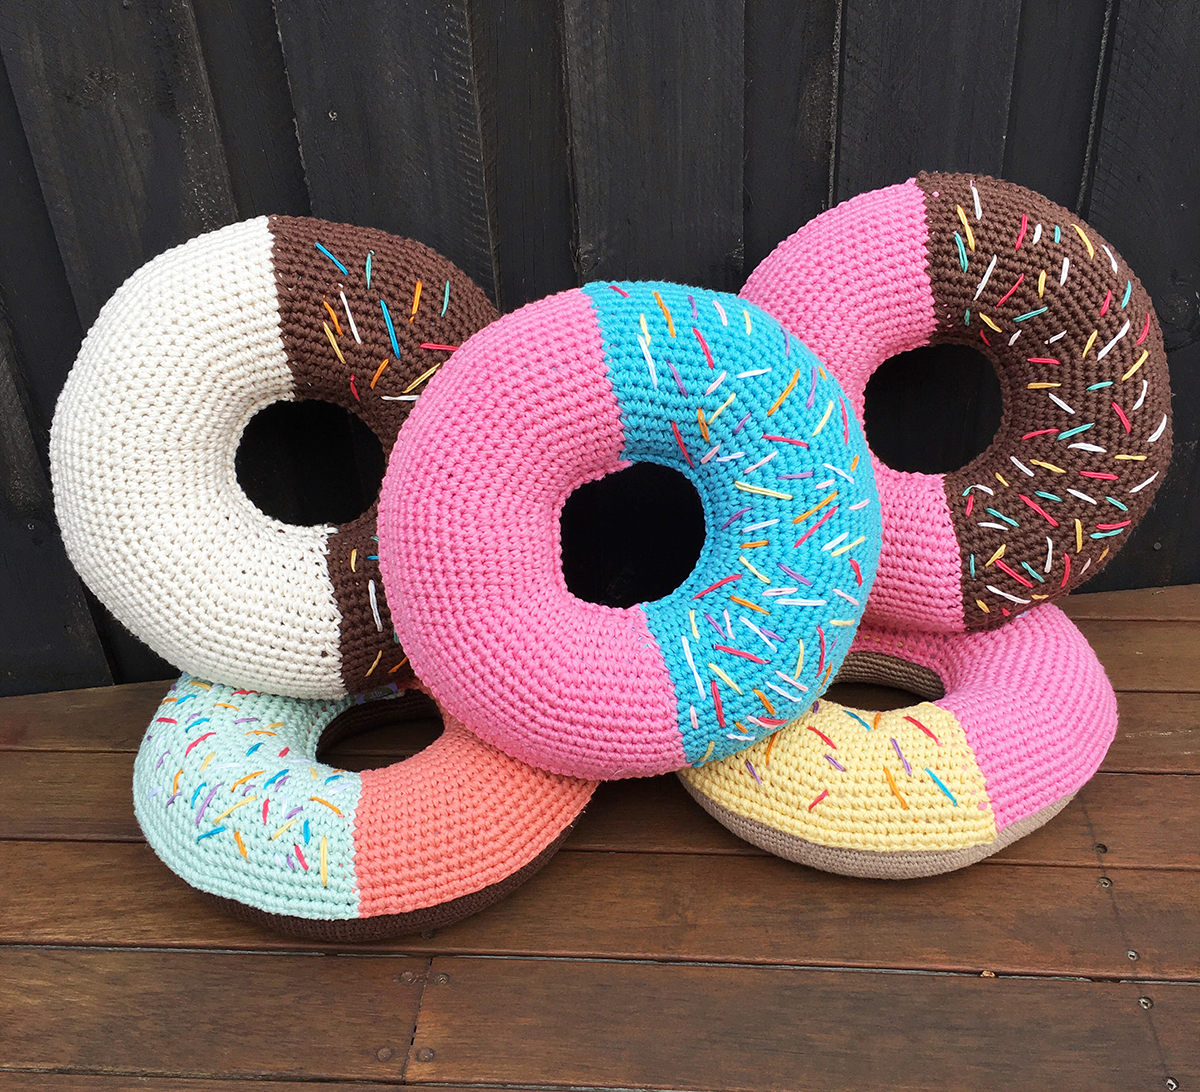 Free Crochet Pillow Patterns Make A Giant Doughnut Cushion With Our Tutorial Mollie Makes